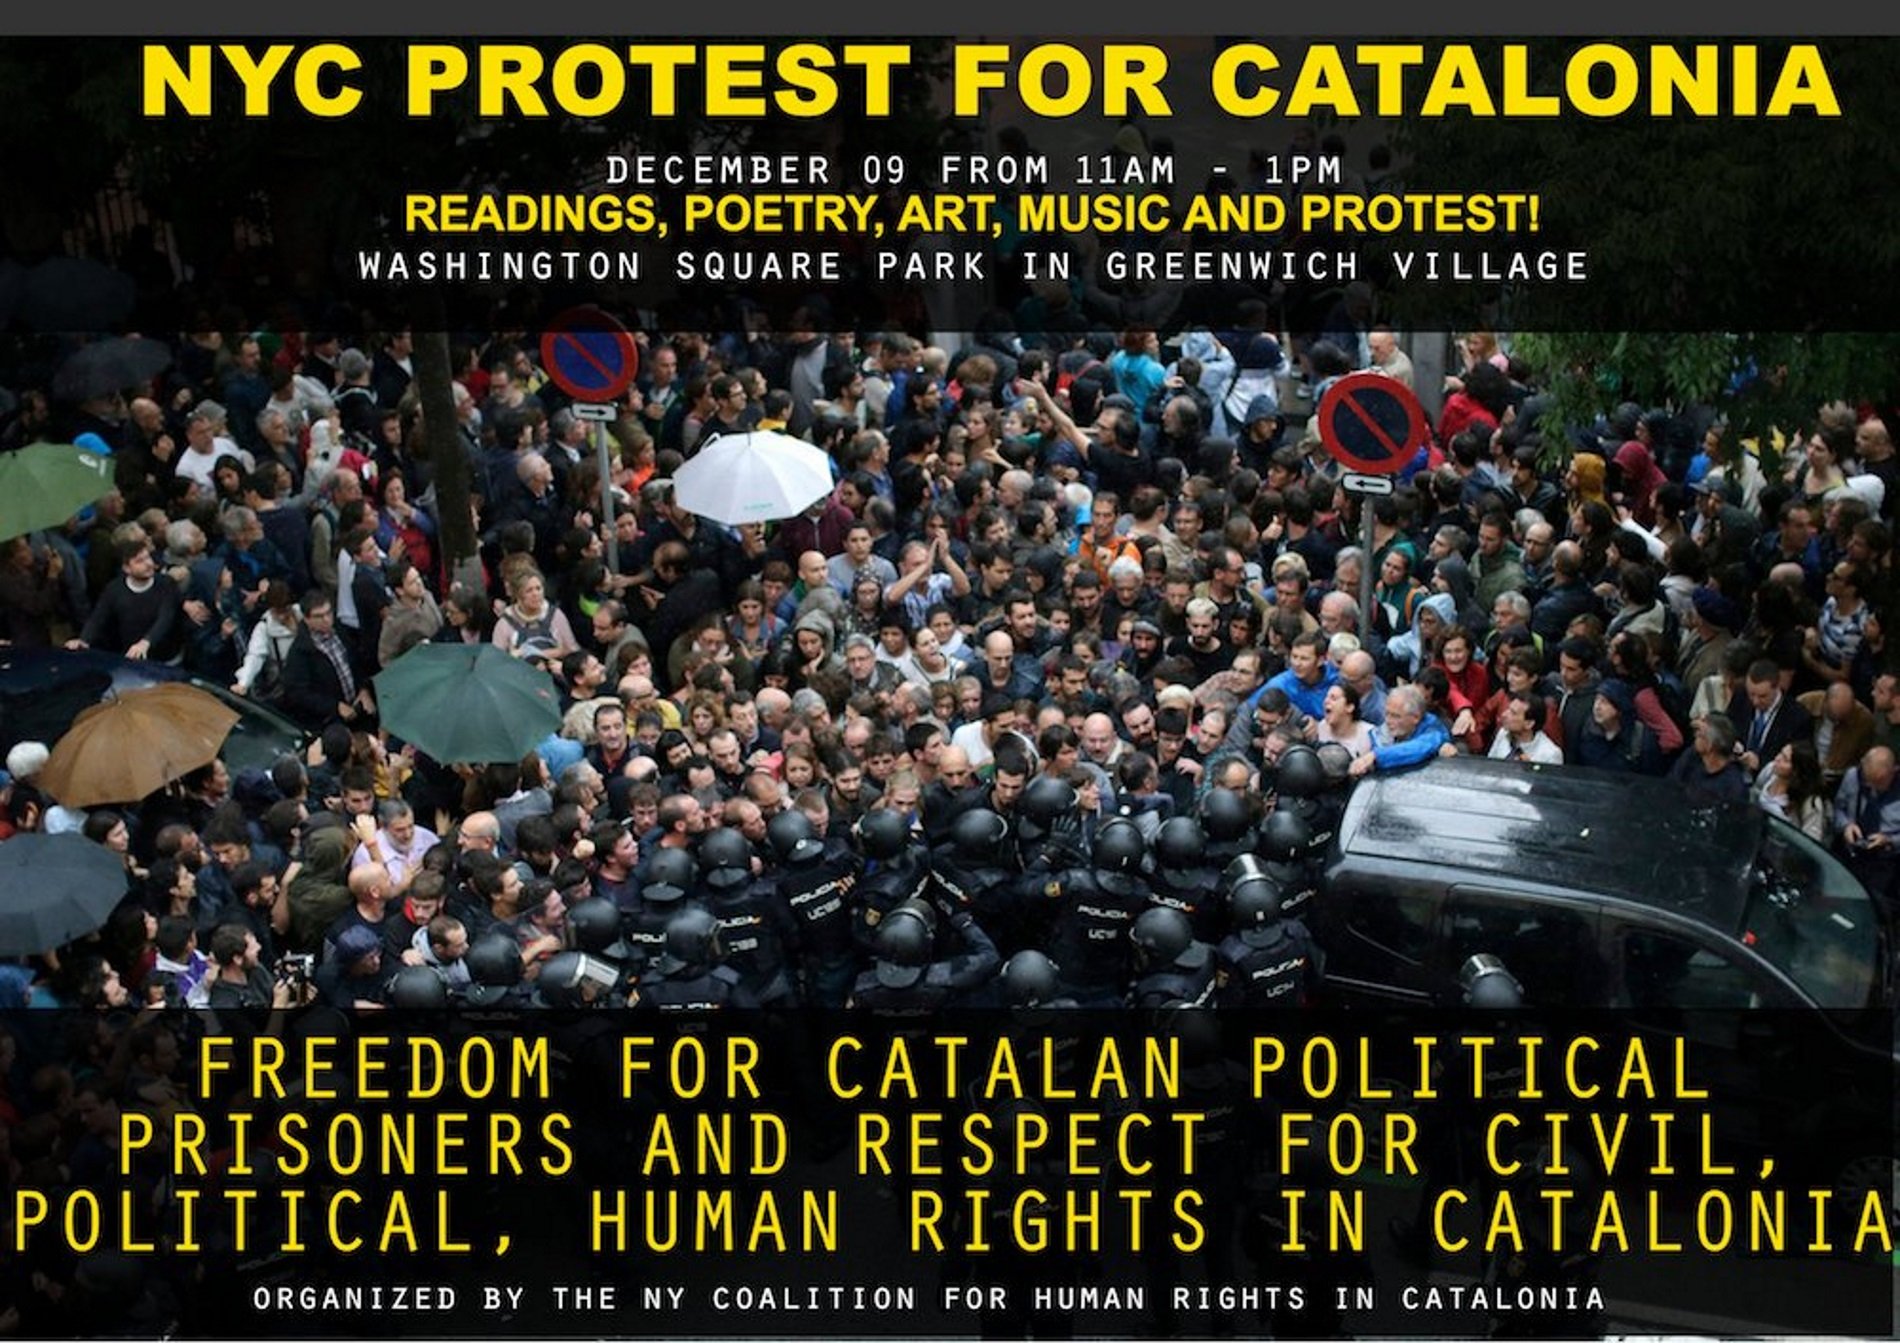 New Yorkers called to protest anti-Catalan repression in Greenwich Village